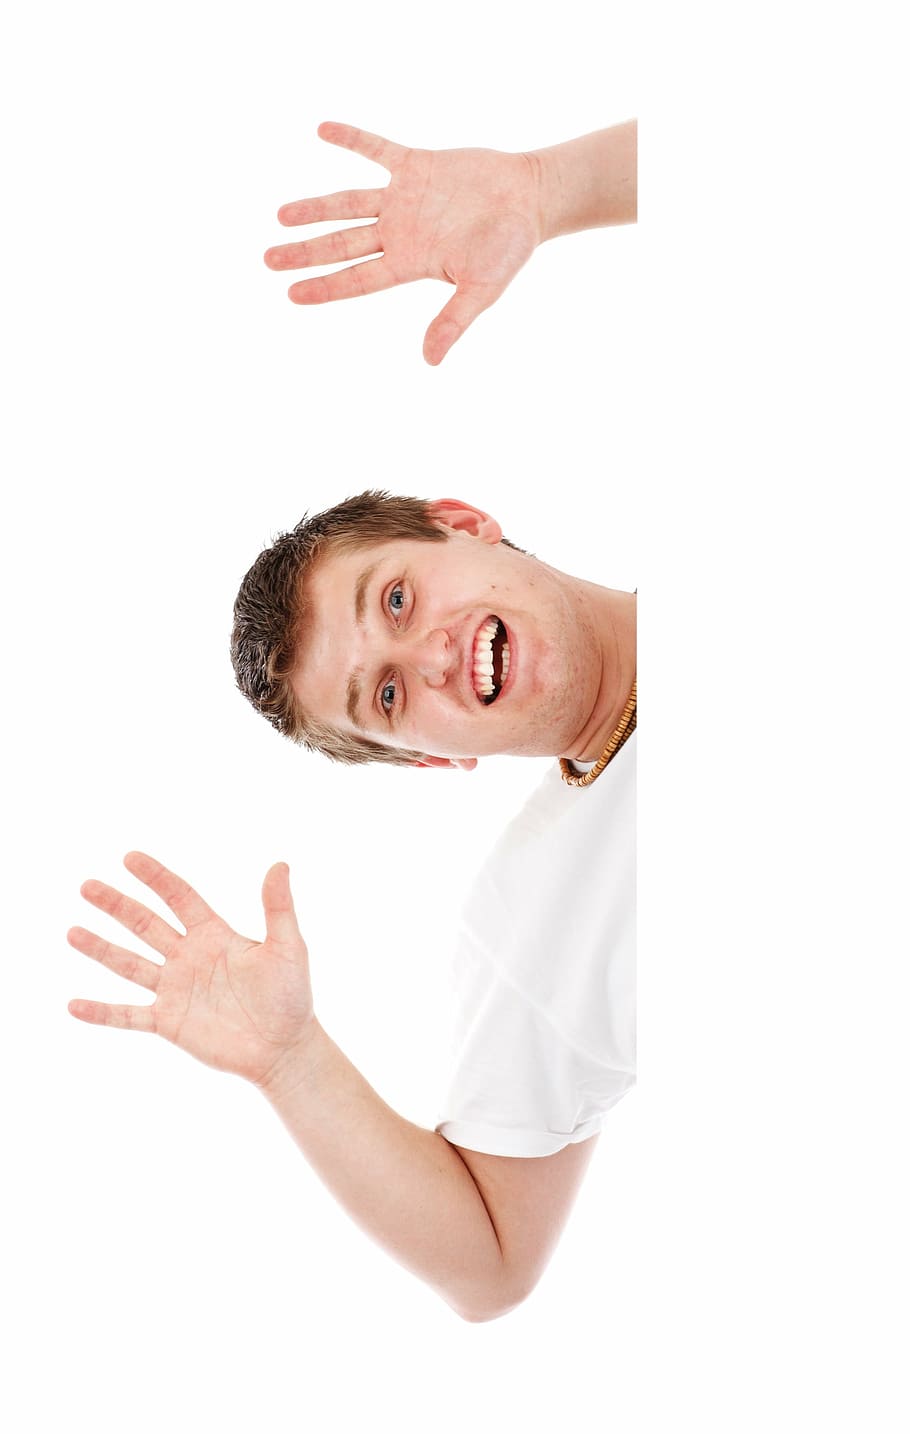 man smiling while raising both hands, advert, advertisement, background